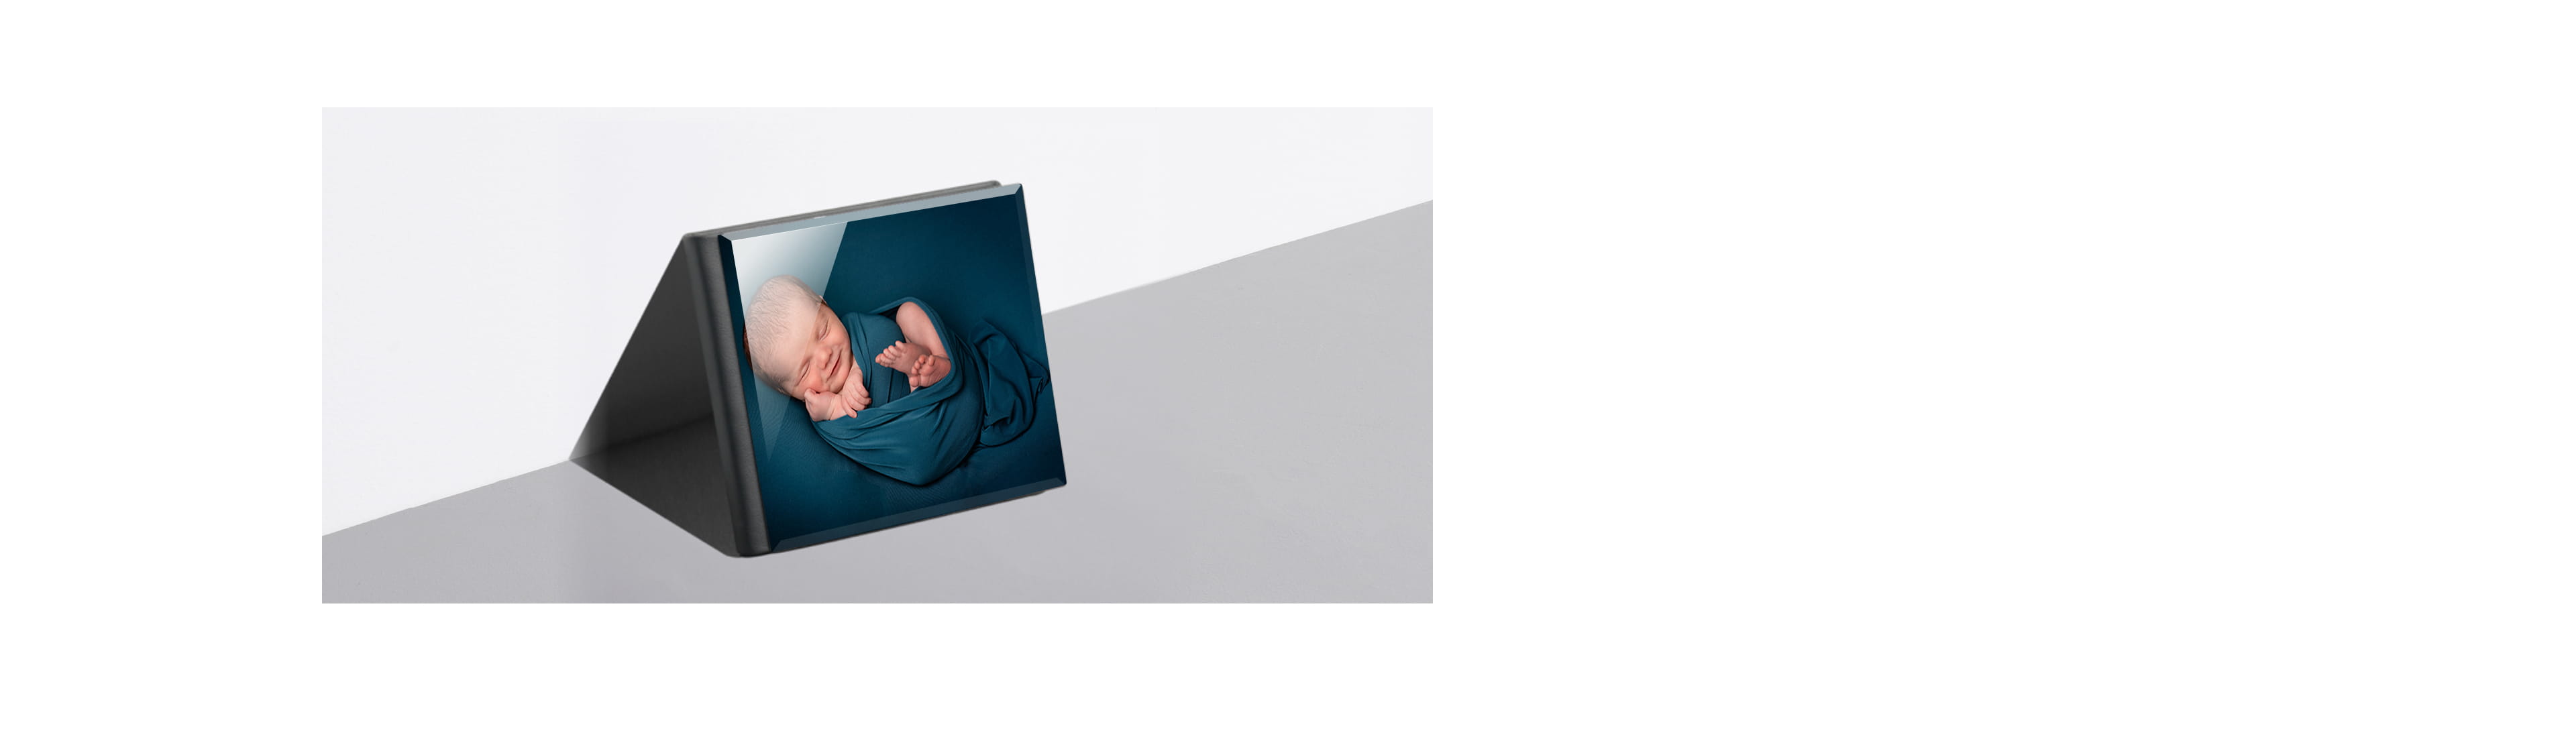 newborn album leaning against a wall with a baby on cover